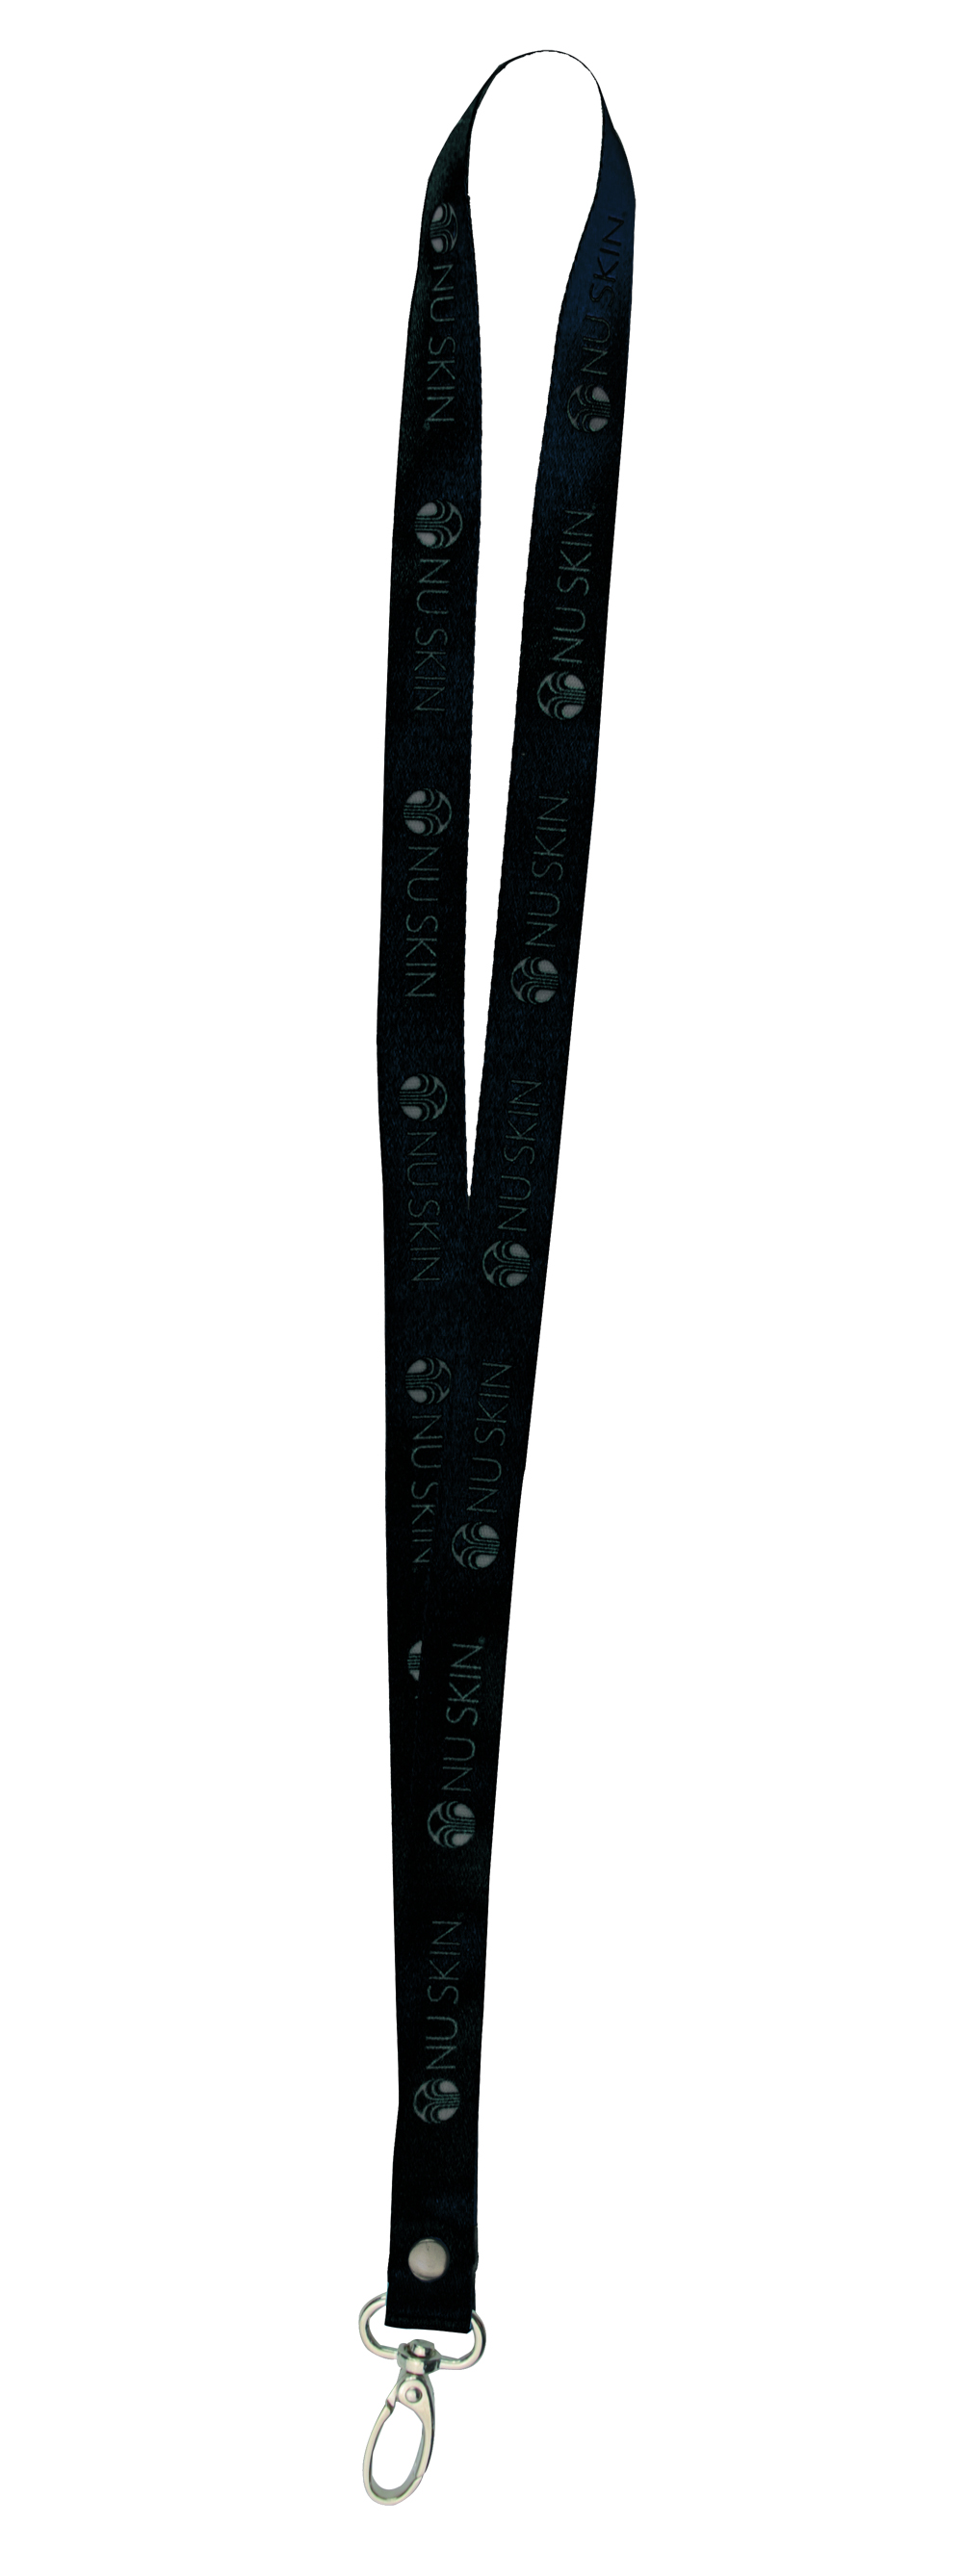 20mm Lanyard with Oval Hook